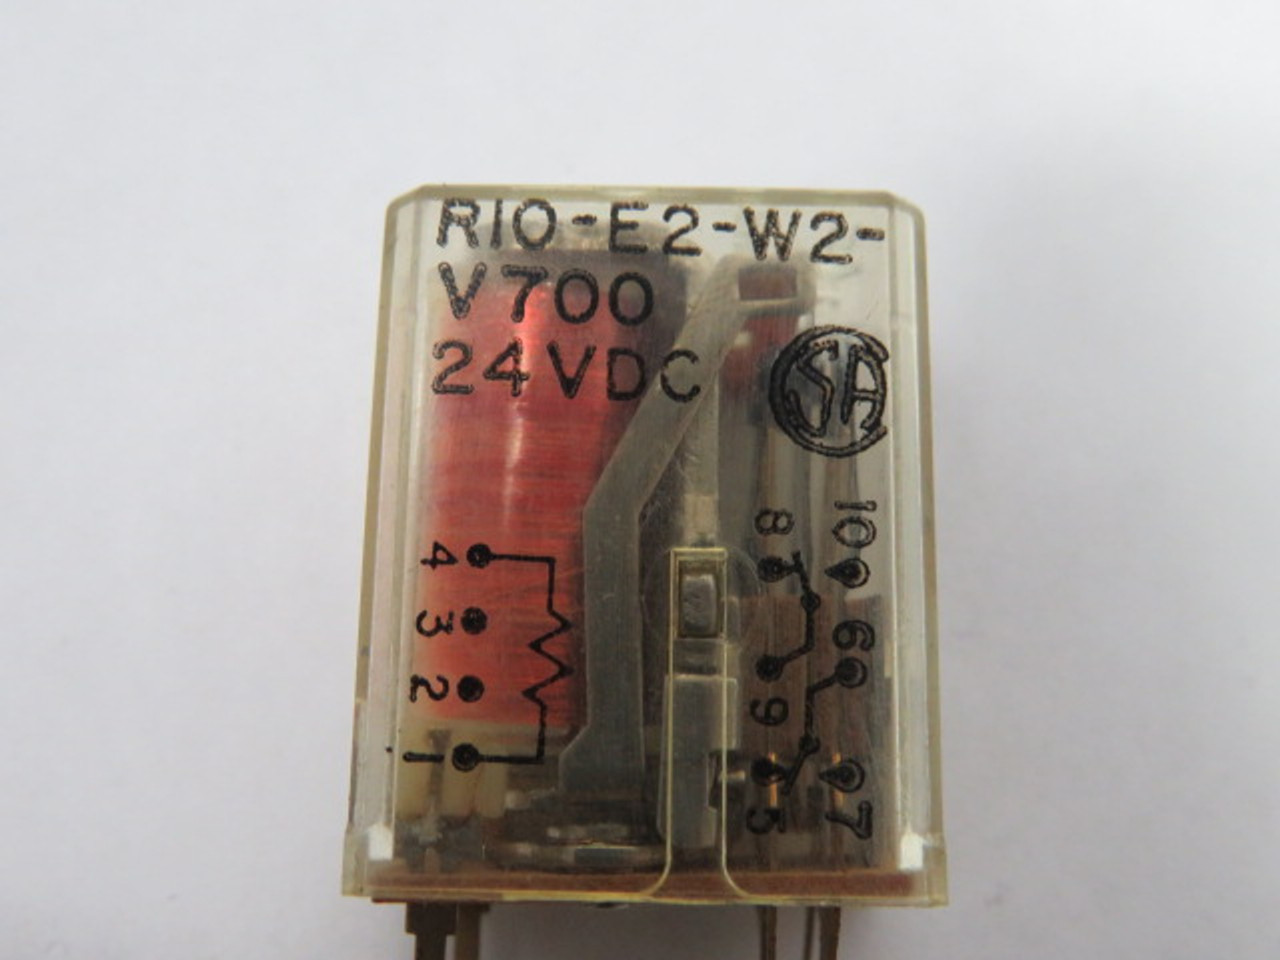 AMF Potter & Brumfield R10-E2-W2-V700 Ice Cube Relay 24VDC 7.5A 8-Blade USED